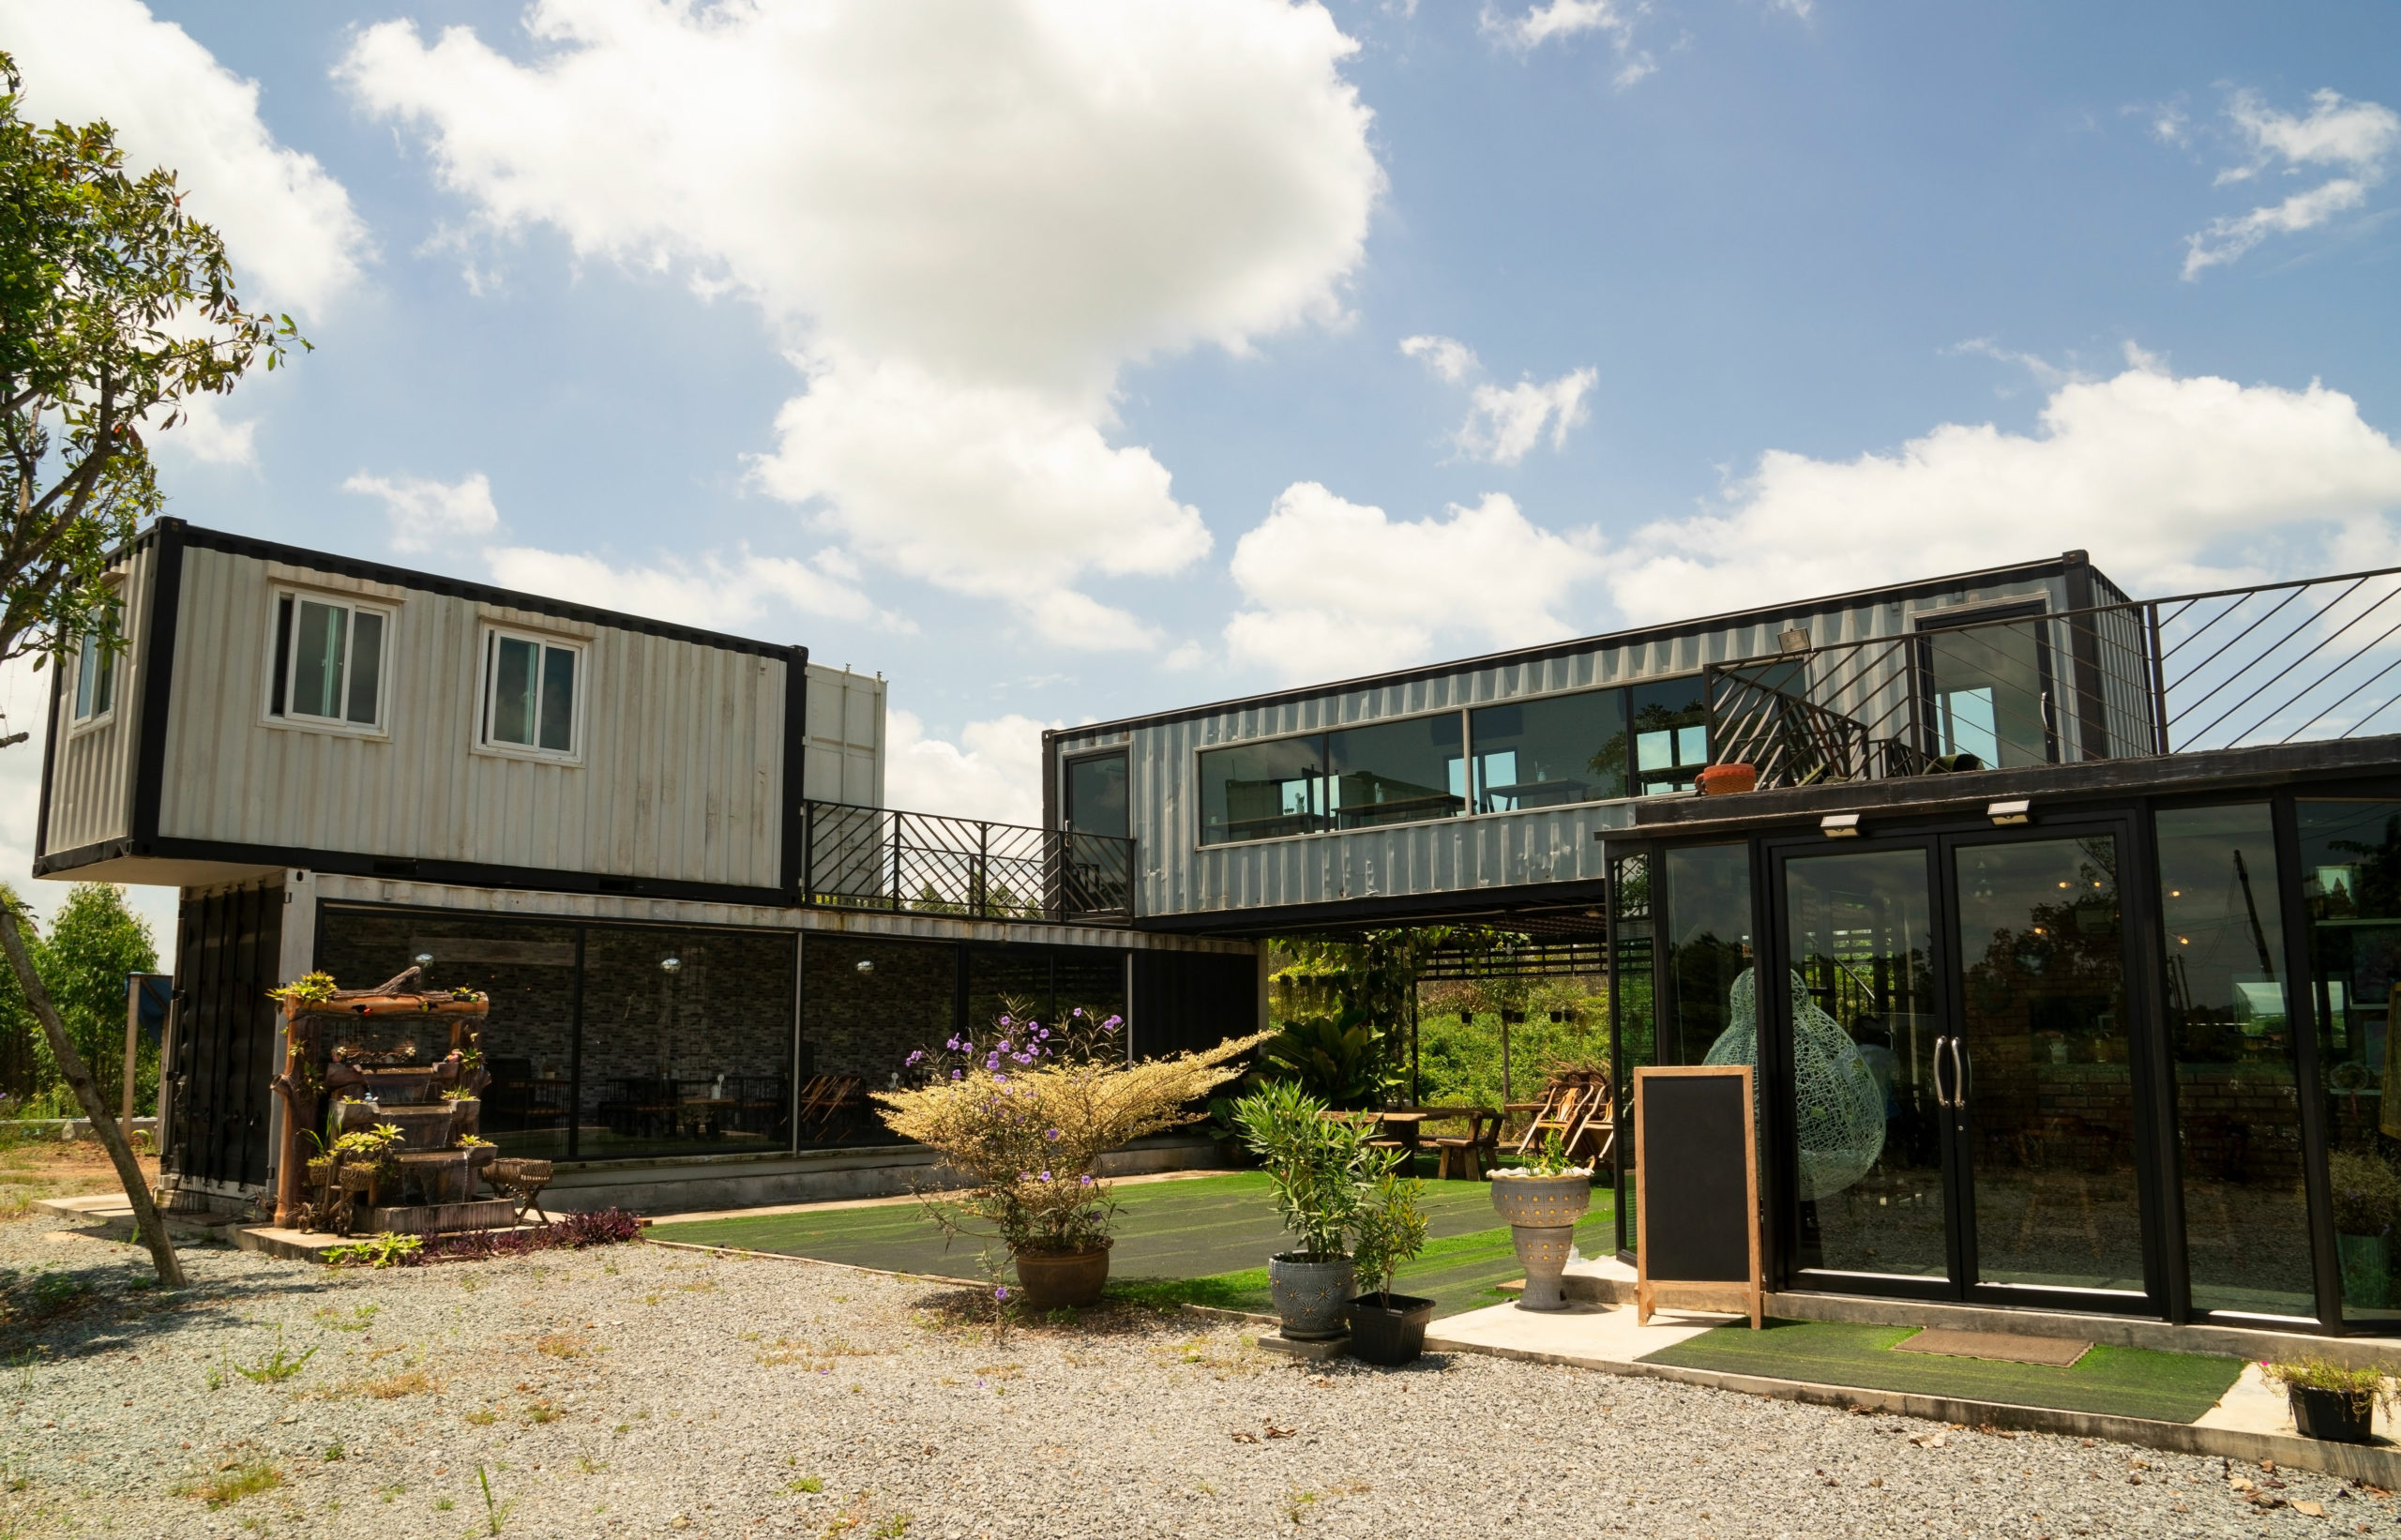 7 Innovative Ways to Modify Shipping Containers